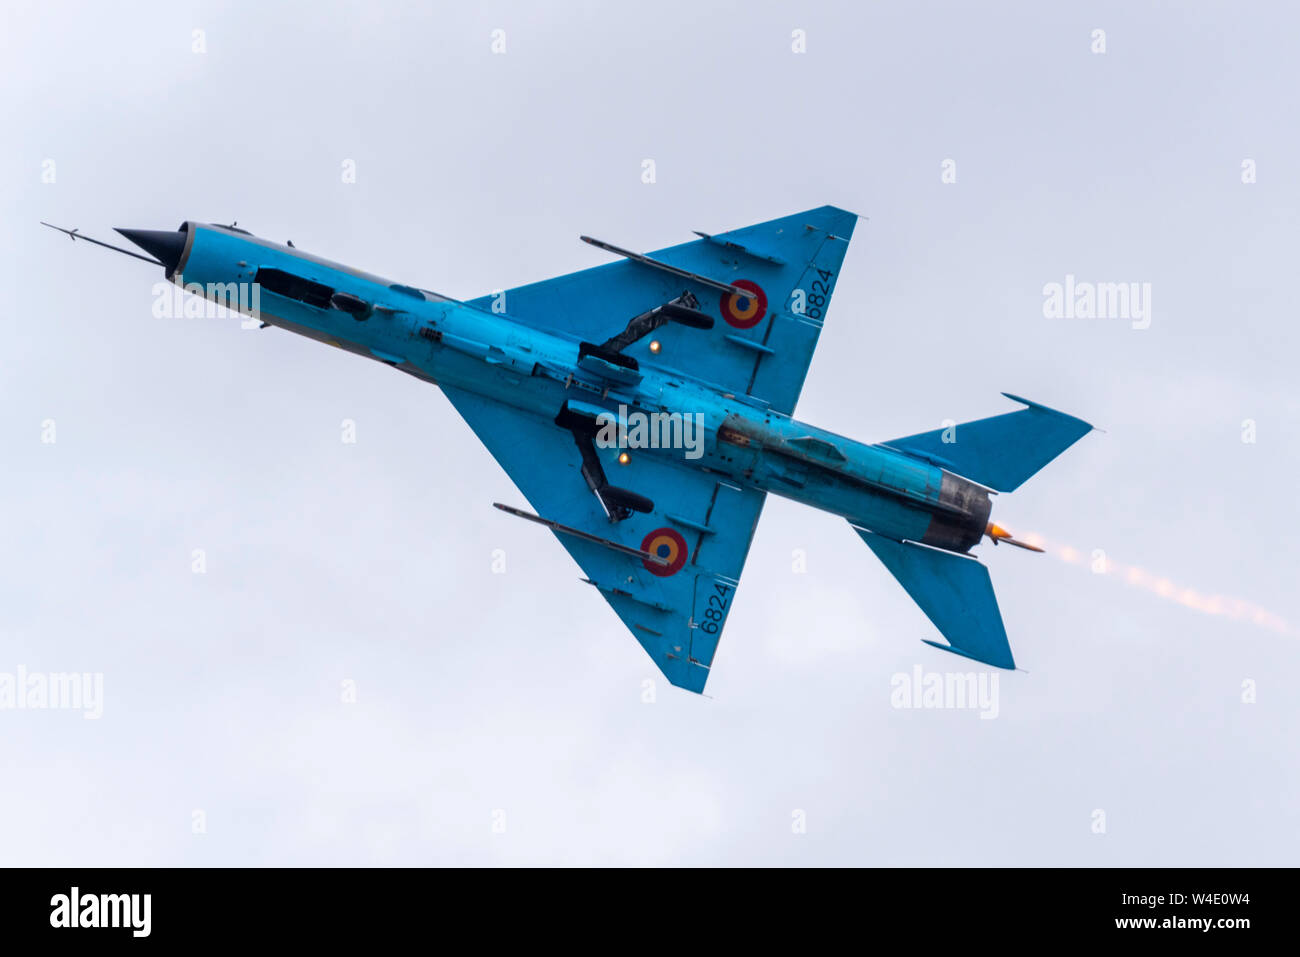 Romanian Air Force MiG-21 LanceR C jet fighter plane flying at Royal International Air Tattoo airshow, RAF Fairford, UK. Vintage Russian Stock Photo